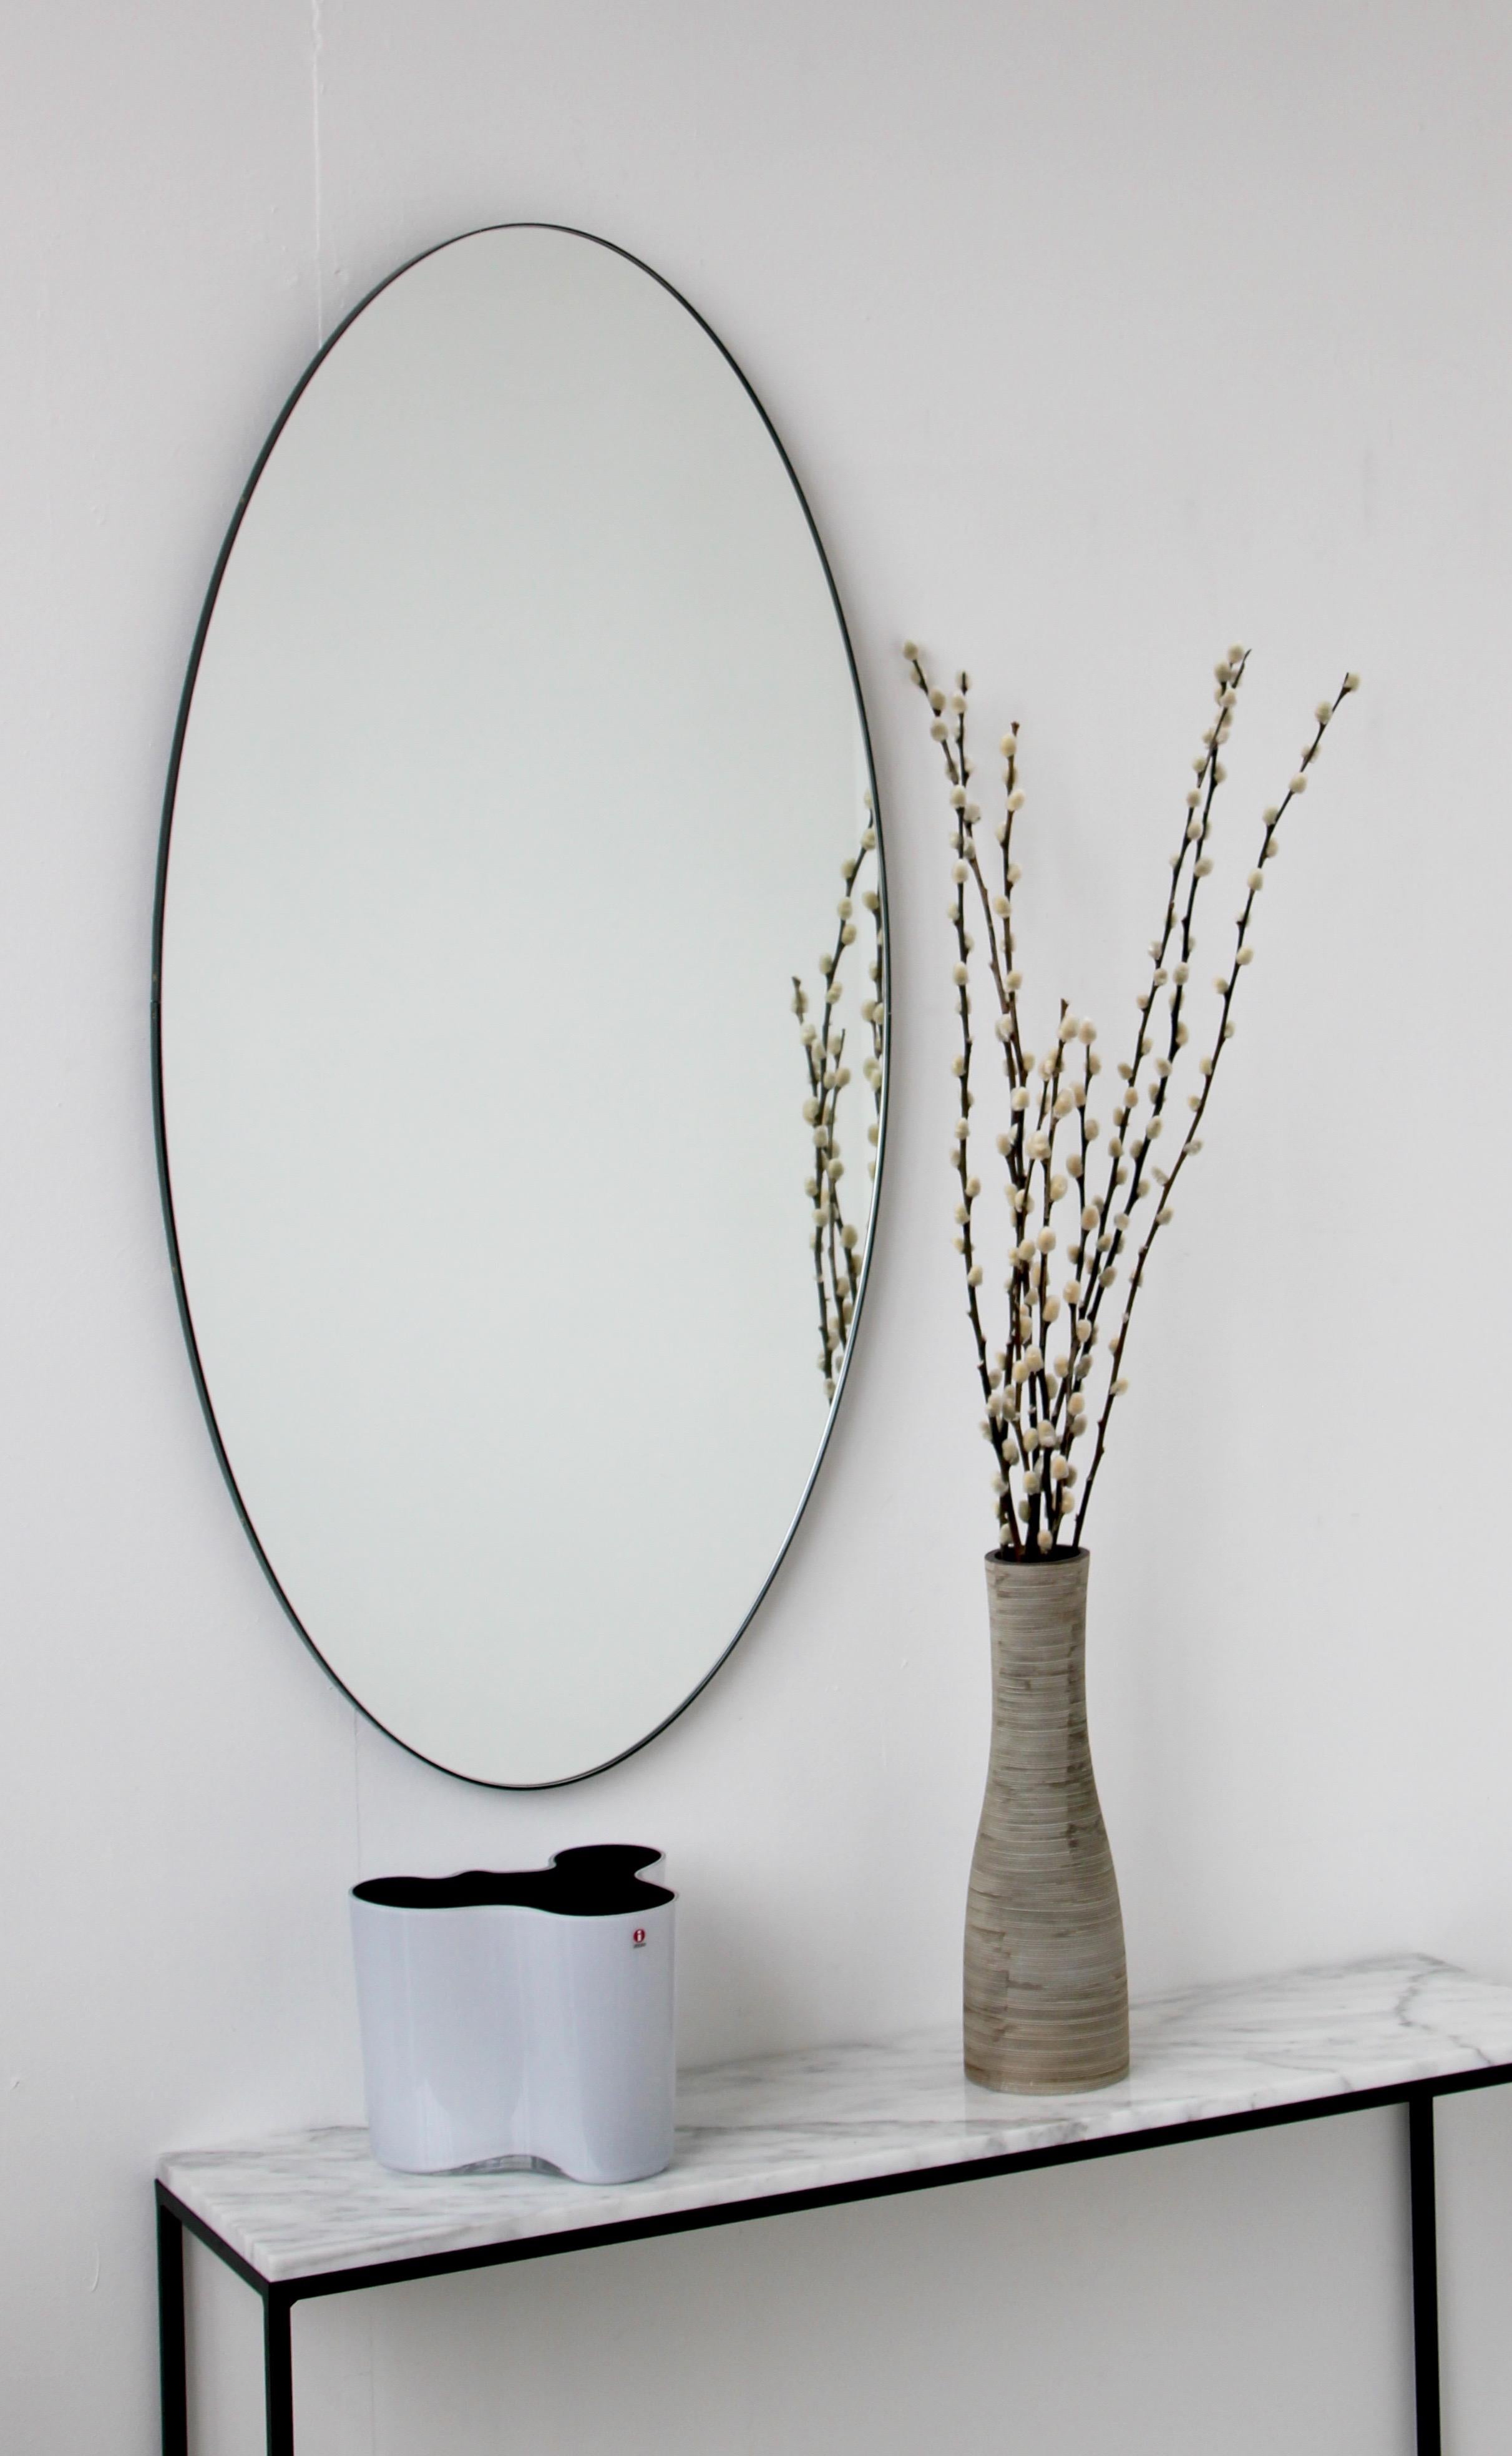 Delightful handcrafted silver oval mirror with a black frame. Designed and made in London, UK.

Measures: w 48cm x h 97cm x d 1.8cm /  w 18.9'' x h 38.2'' x d 0.7''

We supply in custom size, mirror tint or frame finish, and offer beveling as an